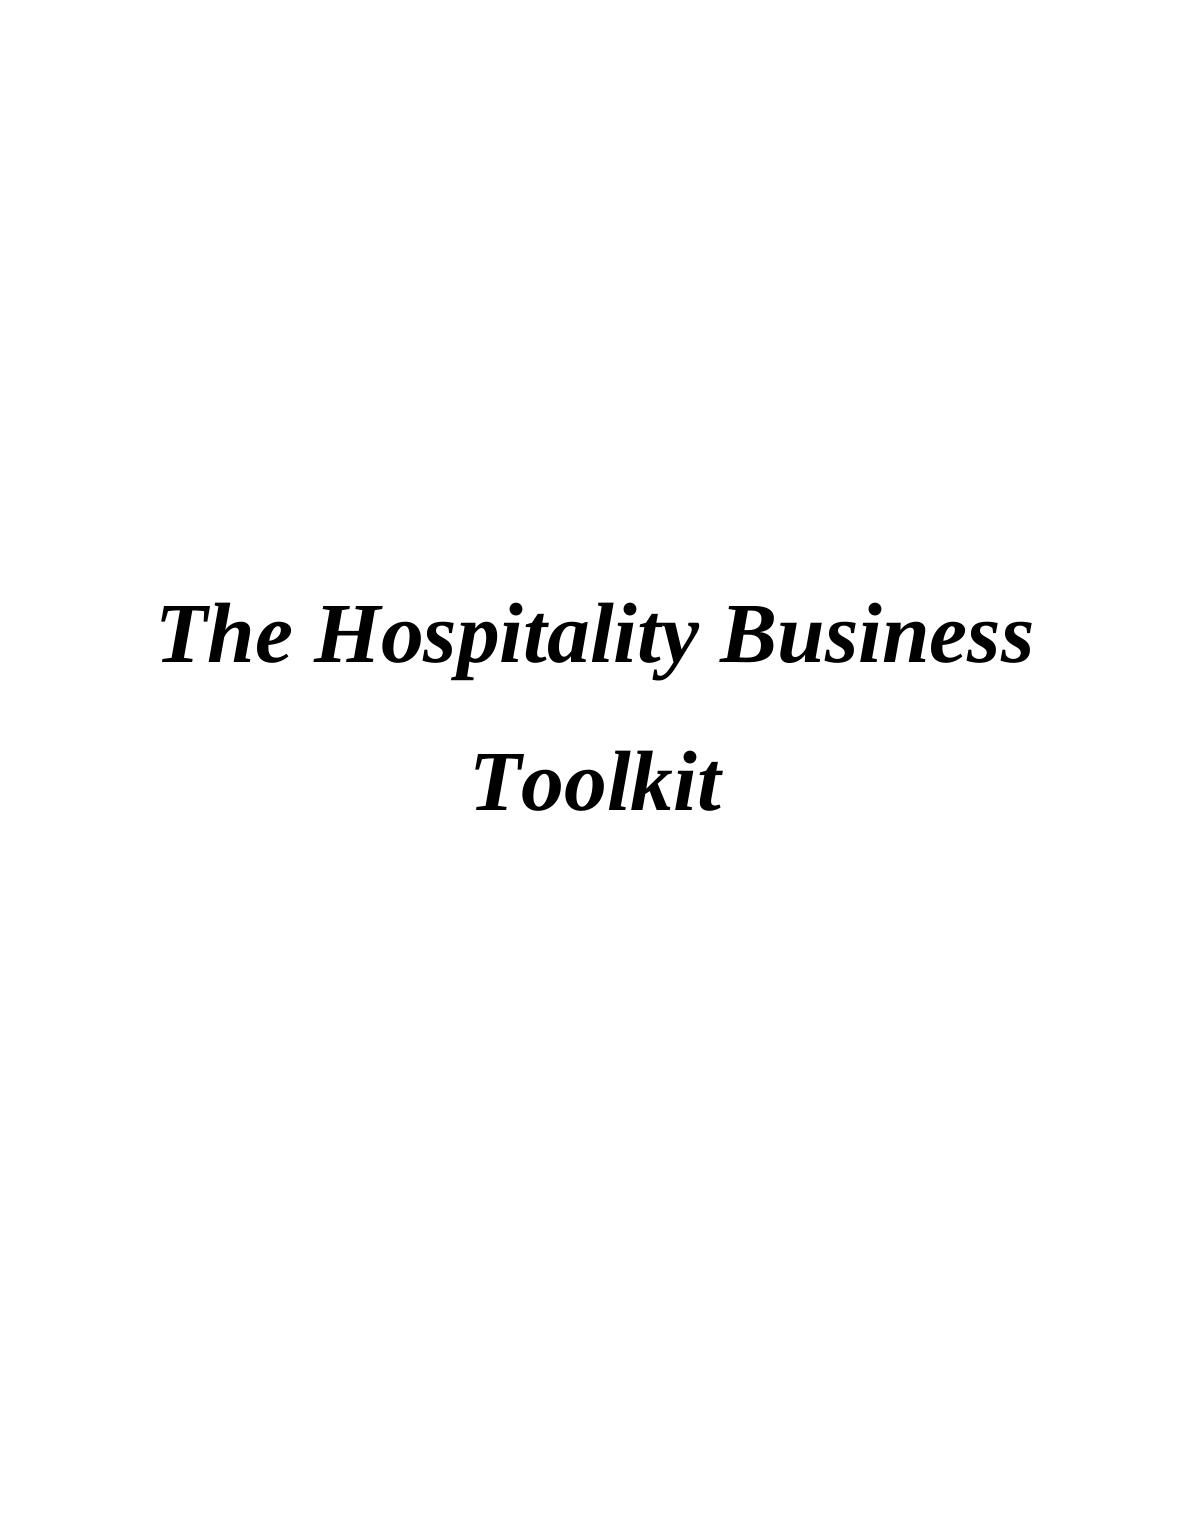 The Hospitality Business Toolkit (Docs)_1